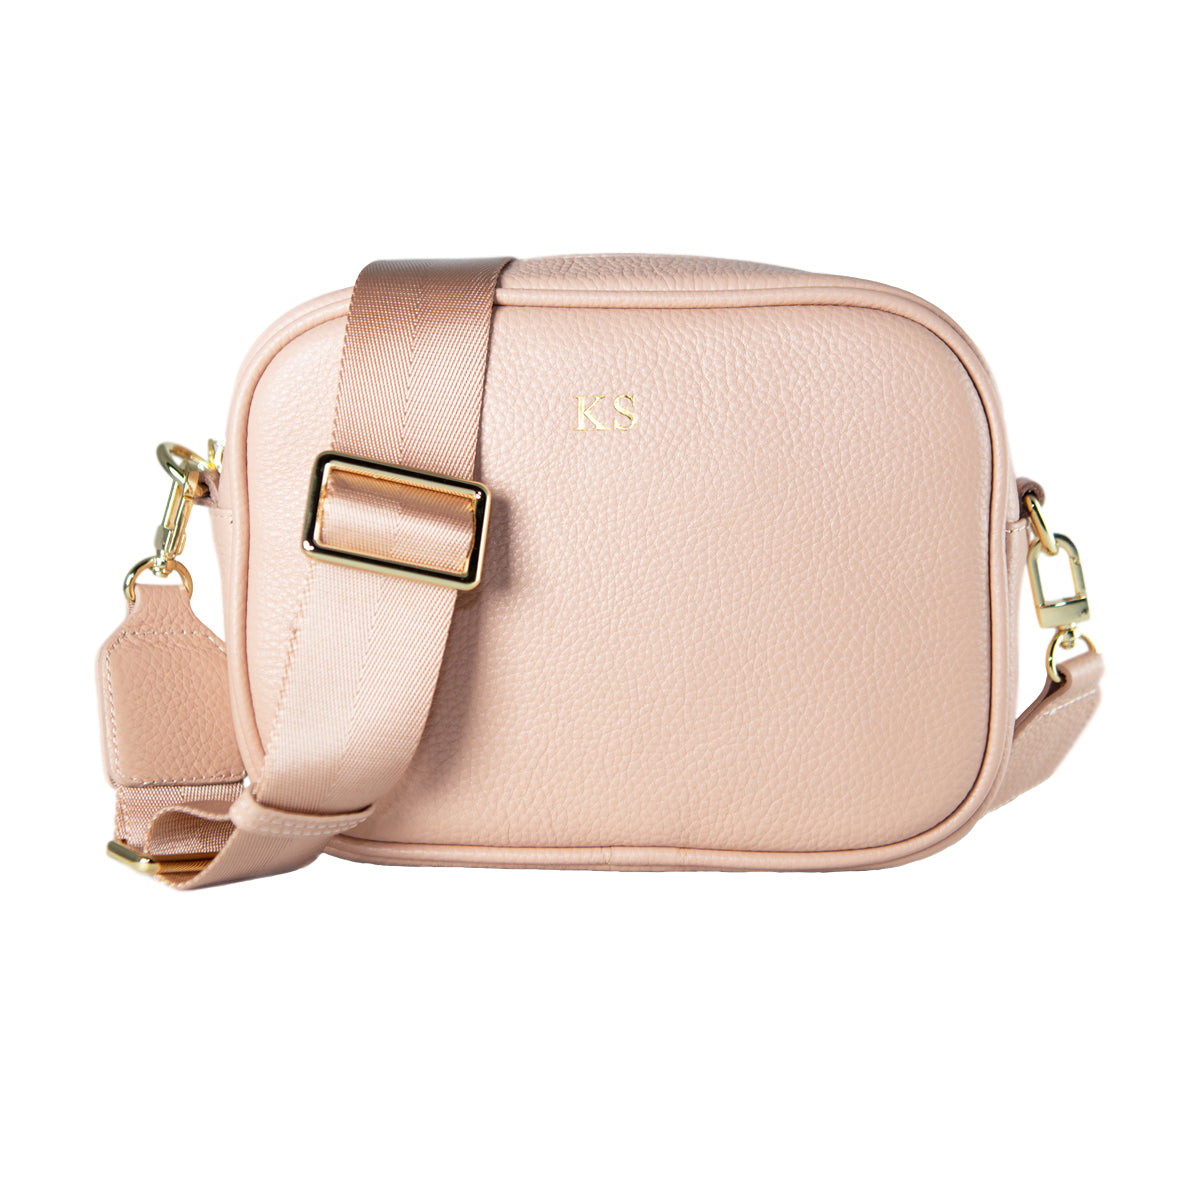 Personalised Nude Cross Body Bag with Nude Strap